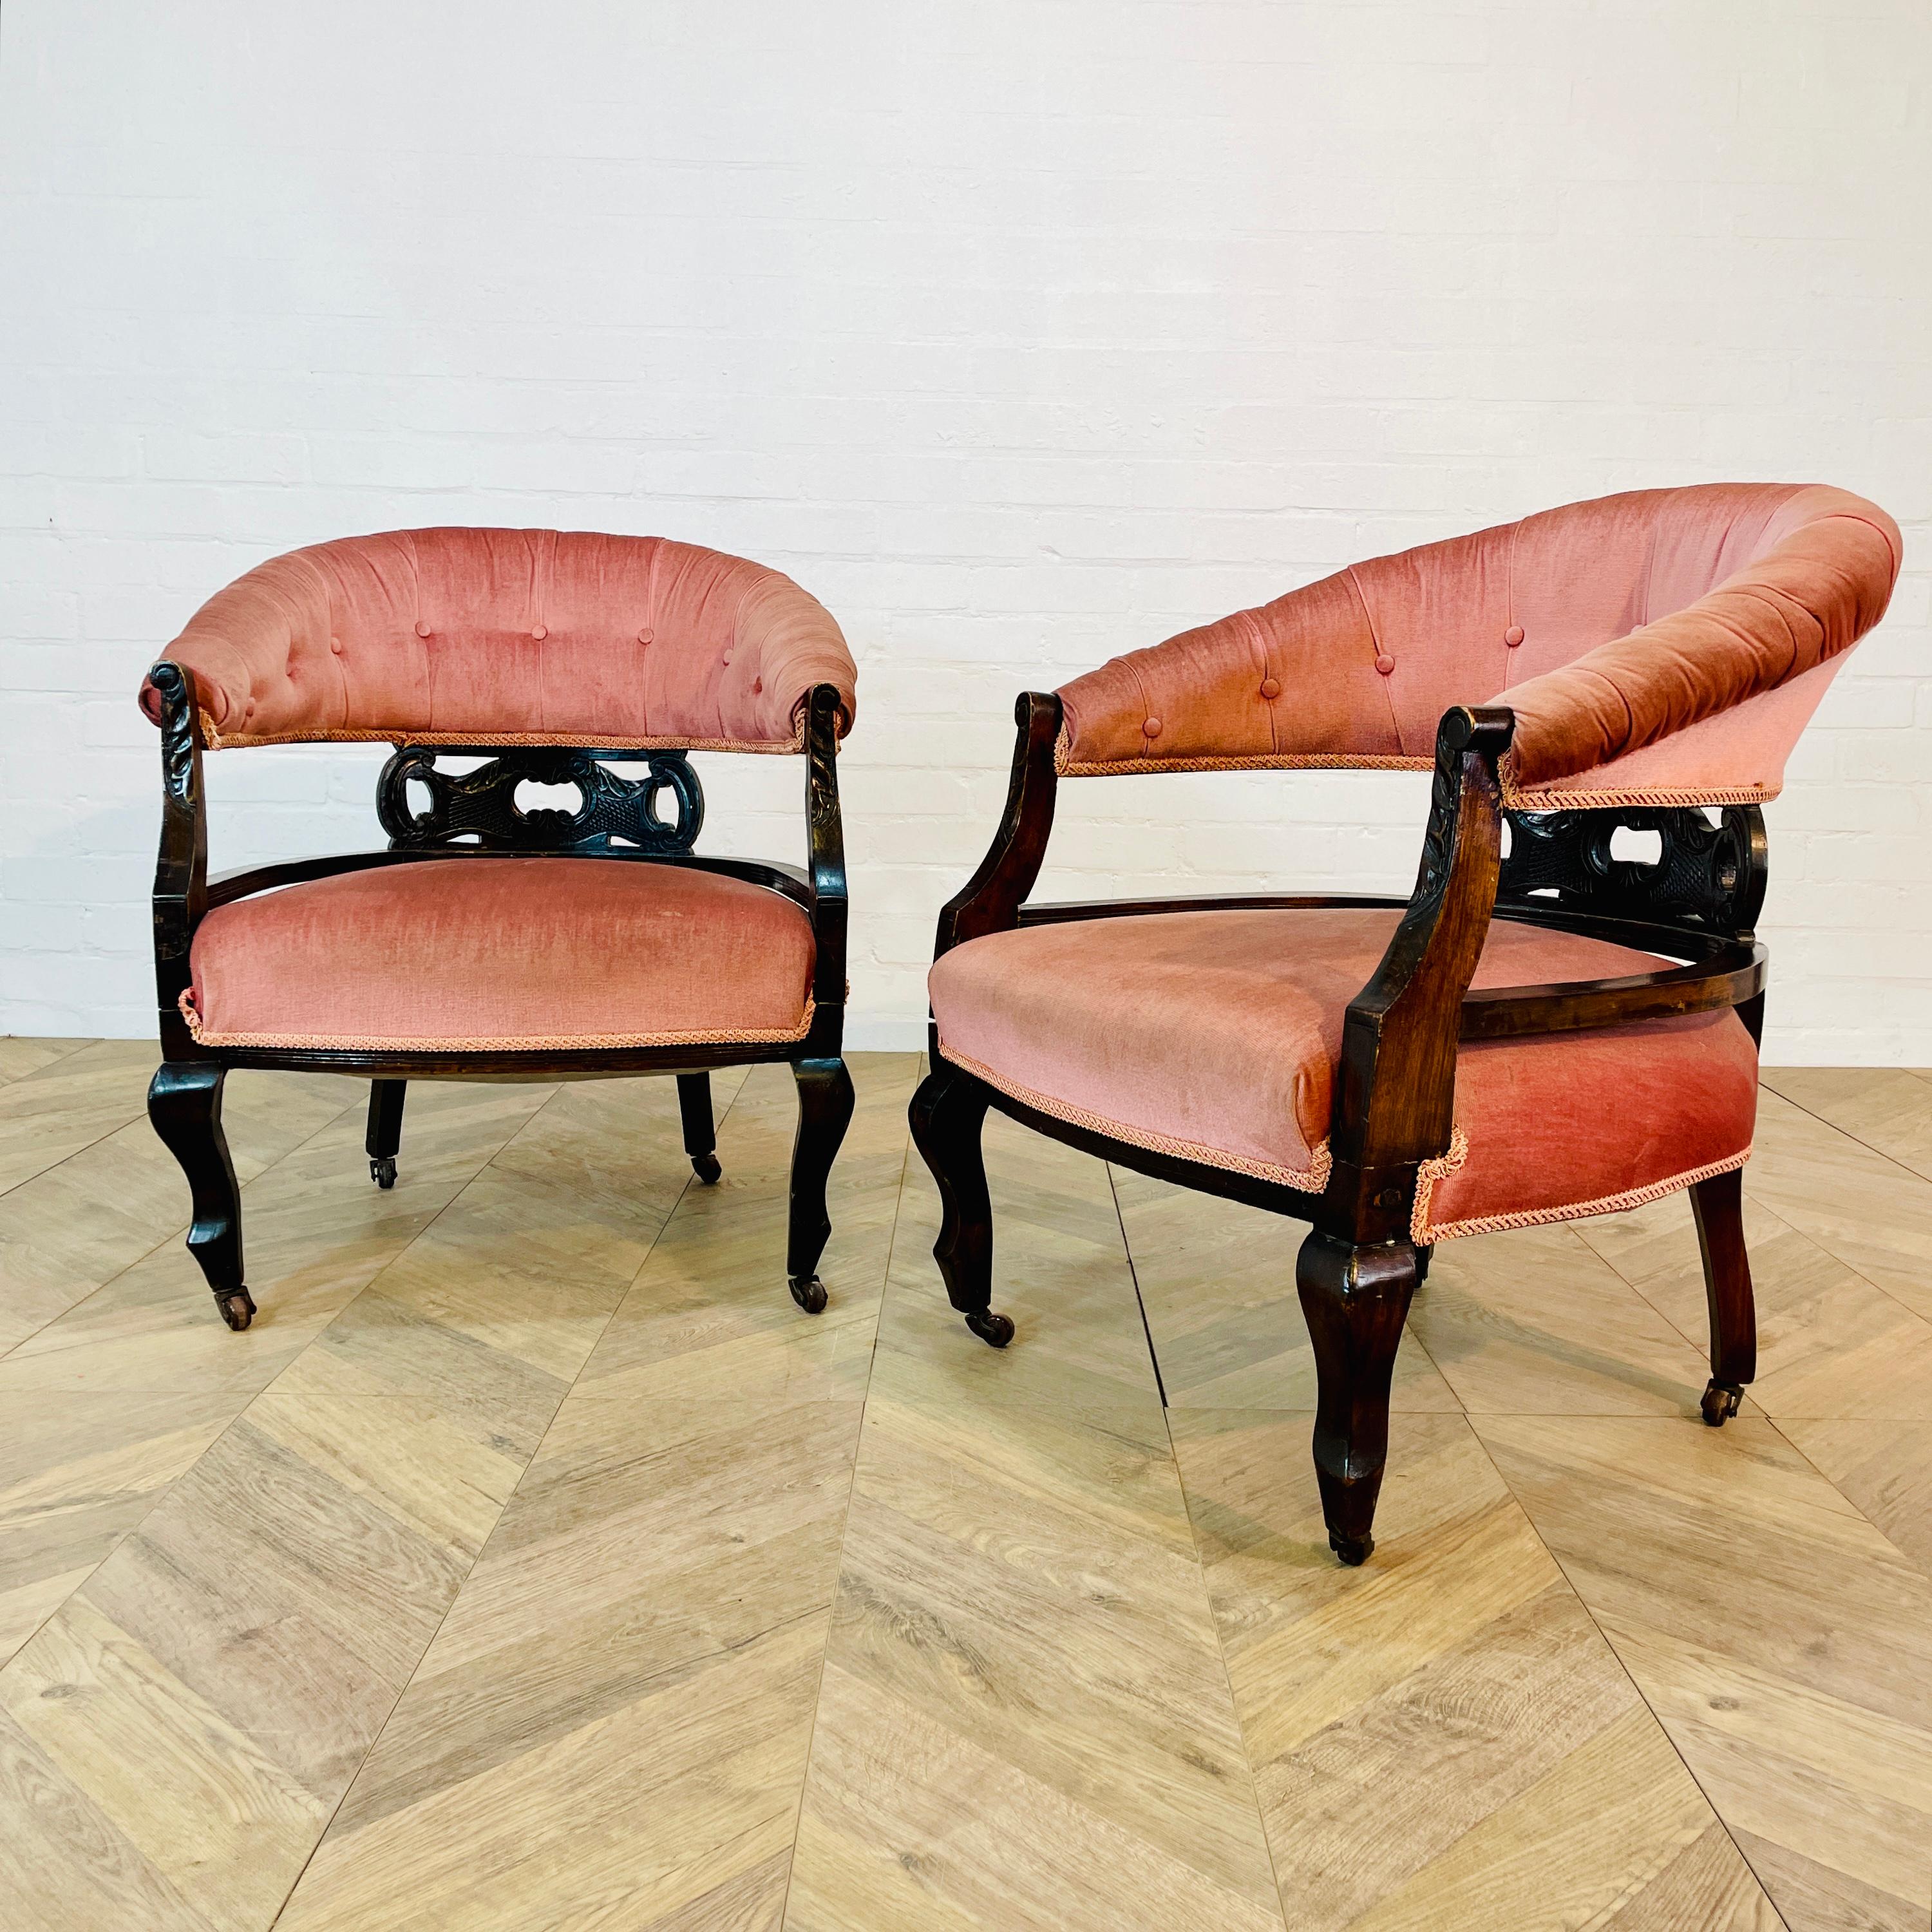 Antique English Edwardian Low Open Armchairs, Set of 2, circa 1900s For Sale 1